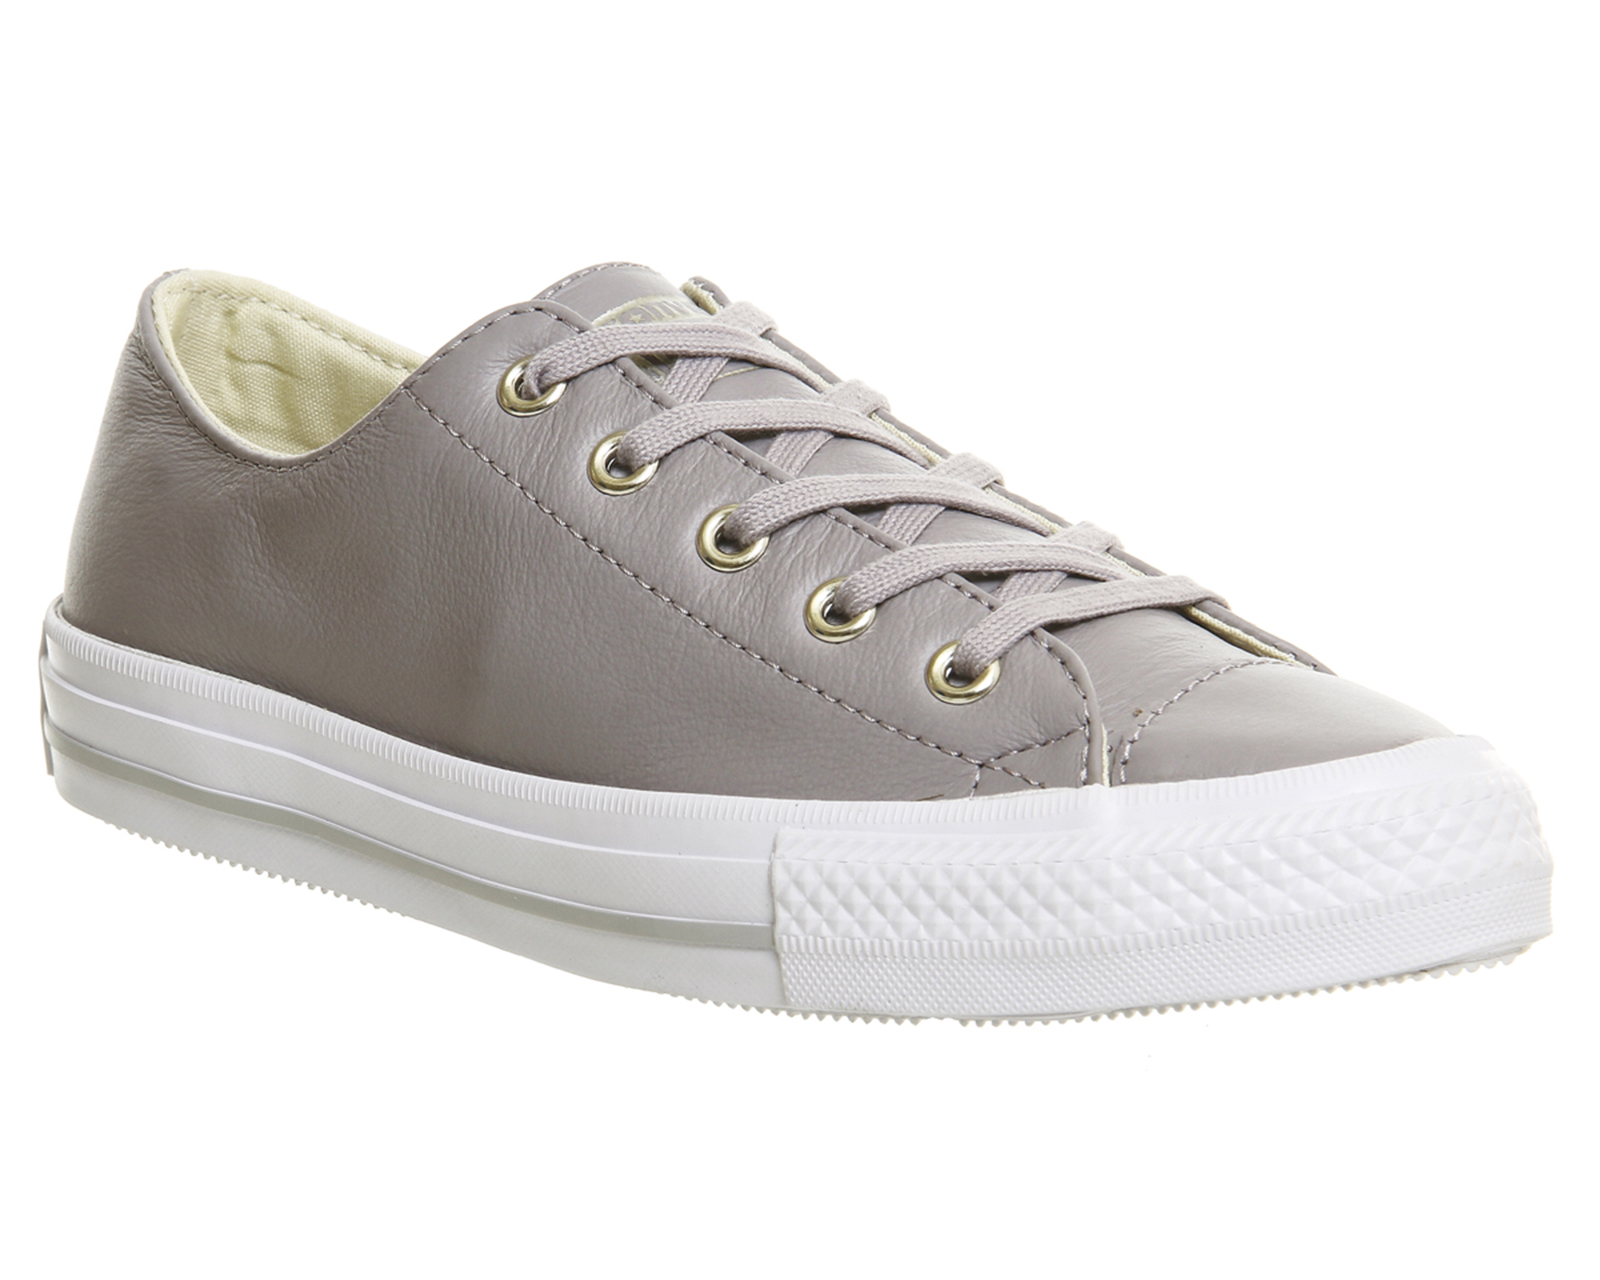 Converse Ctas Gemma Low Leather Gull Grey Pewter - Unisex Sports